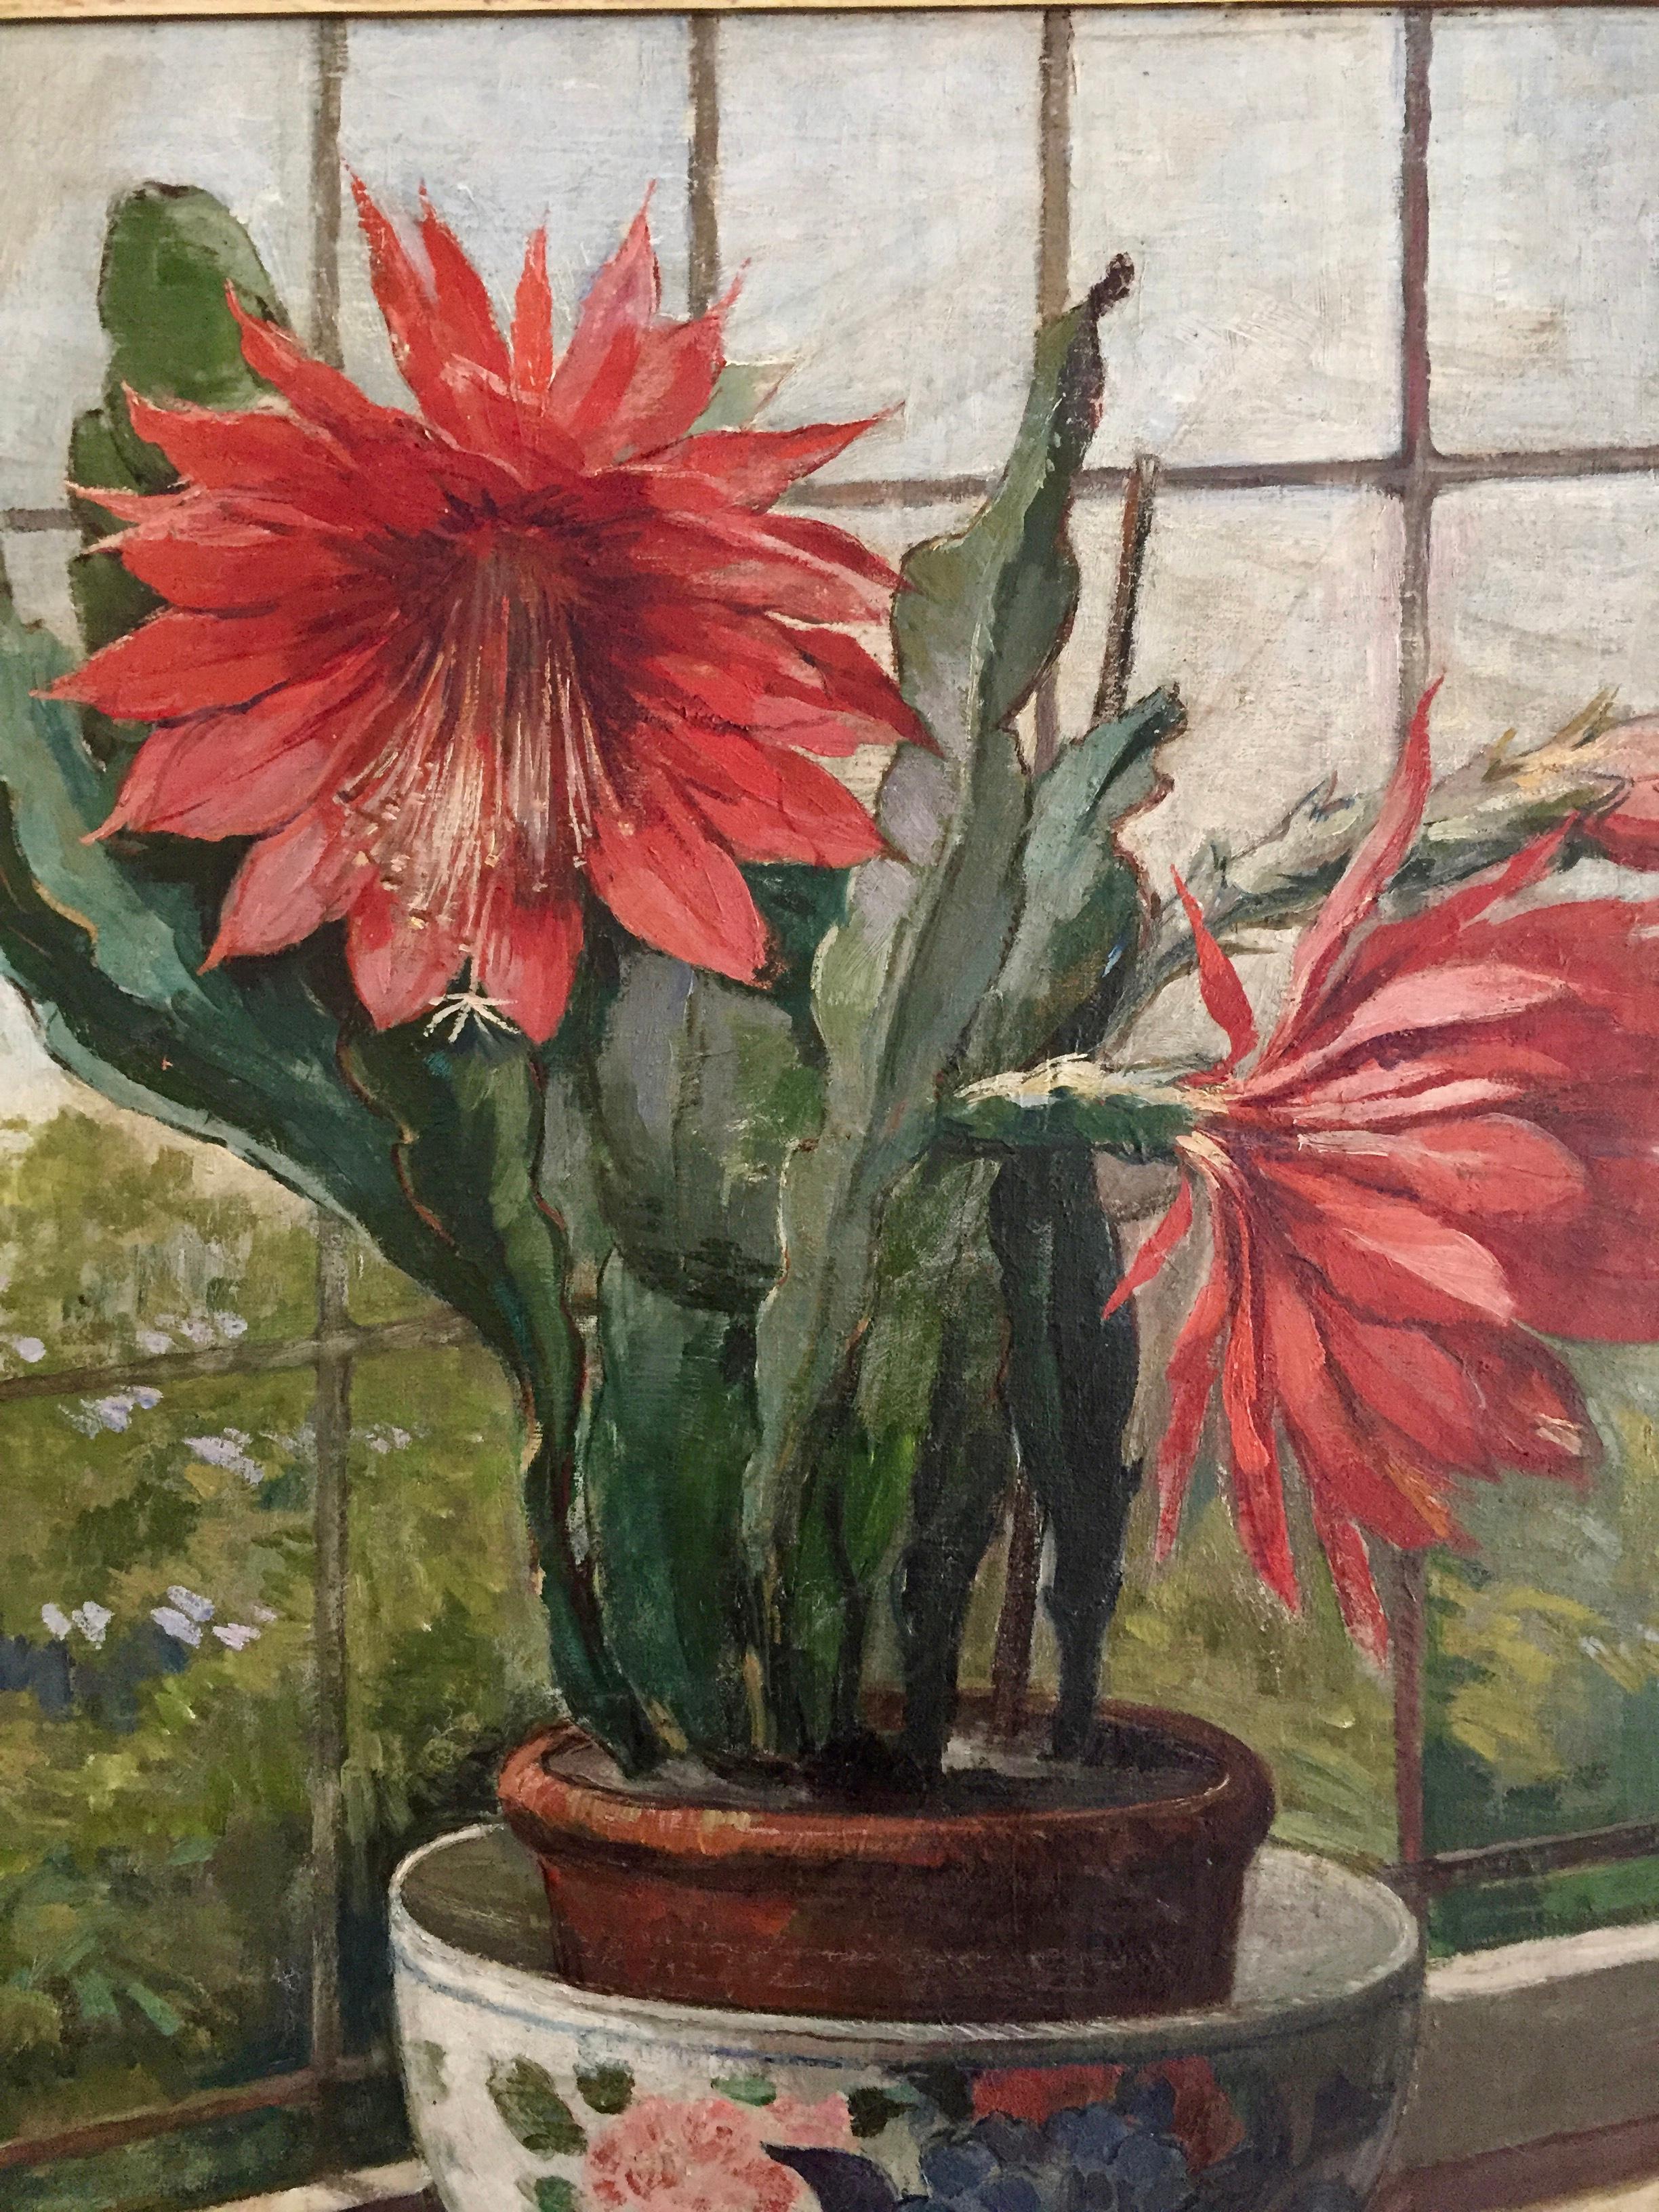 Jeanette Slager, born in 1881 in a well-known Bossche family of artists, concentrated on painting flowers and still lifes. She received her first painting lessons from her father, Piet Slager. Then she trained further under the watchful eye of